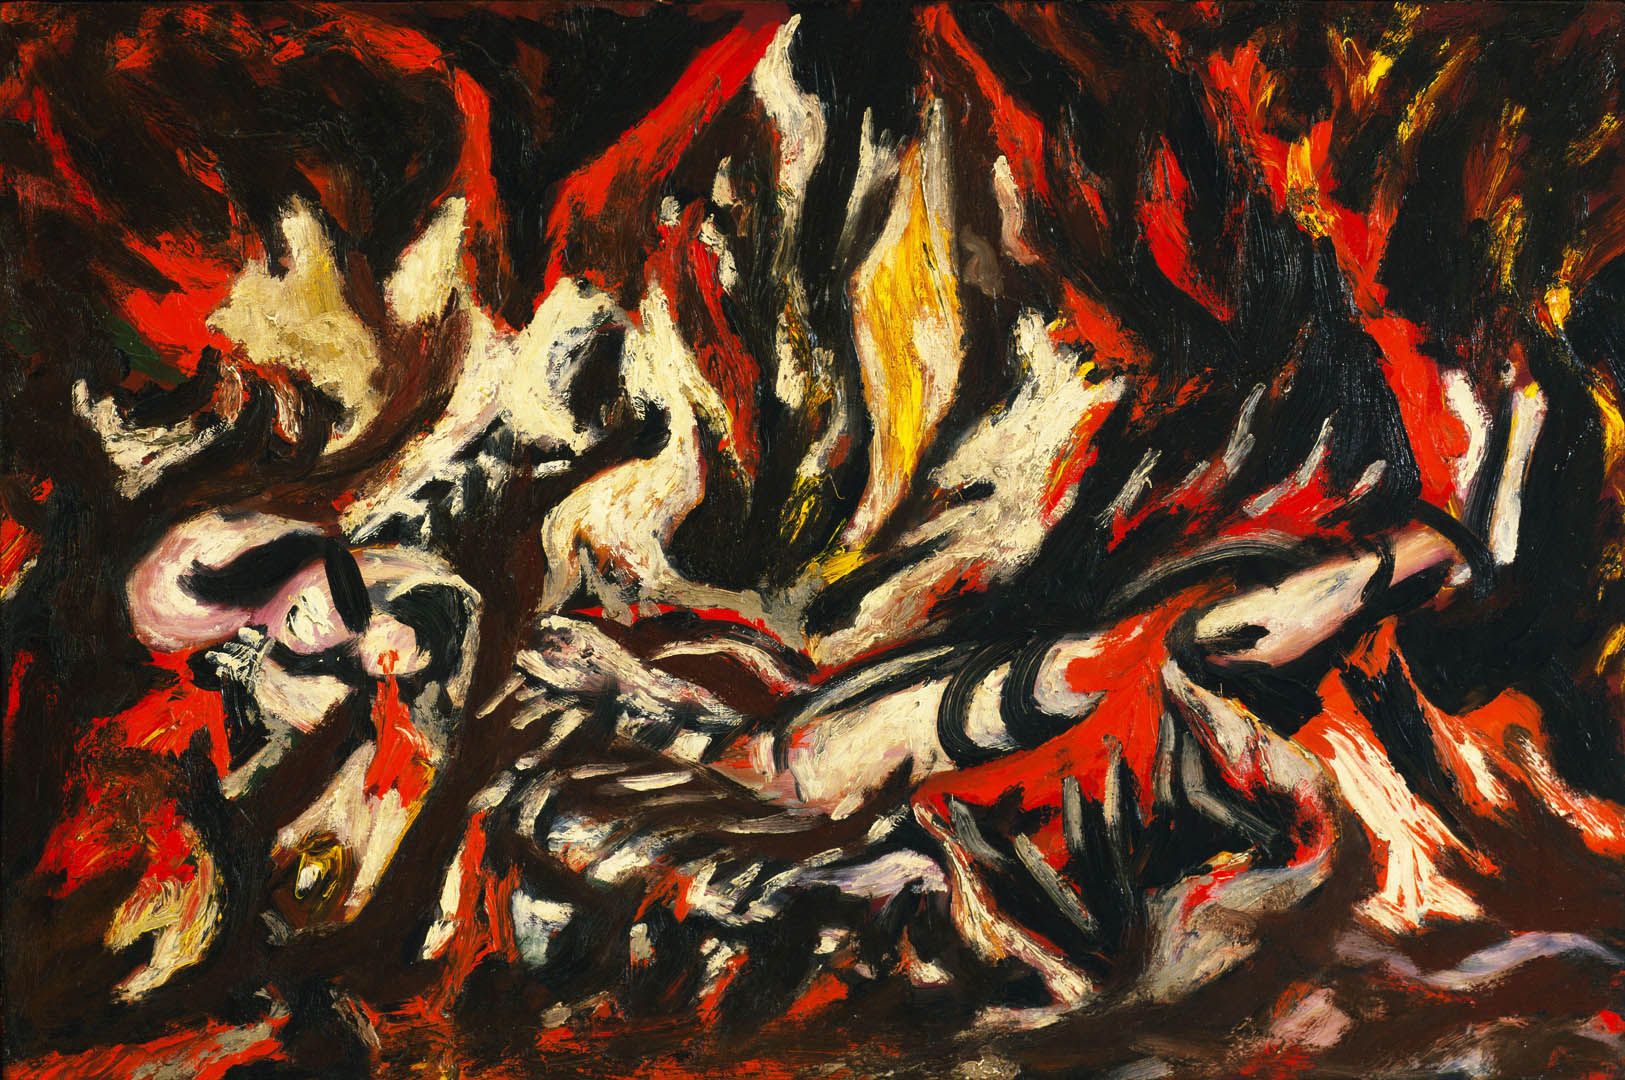 The Flame - Flame By Jackson Pollock - HD Wallpaper 